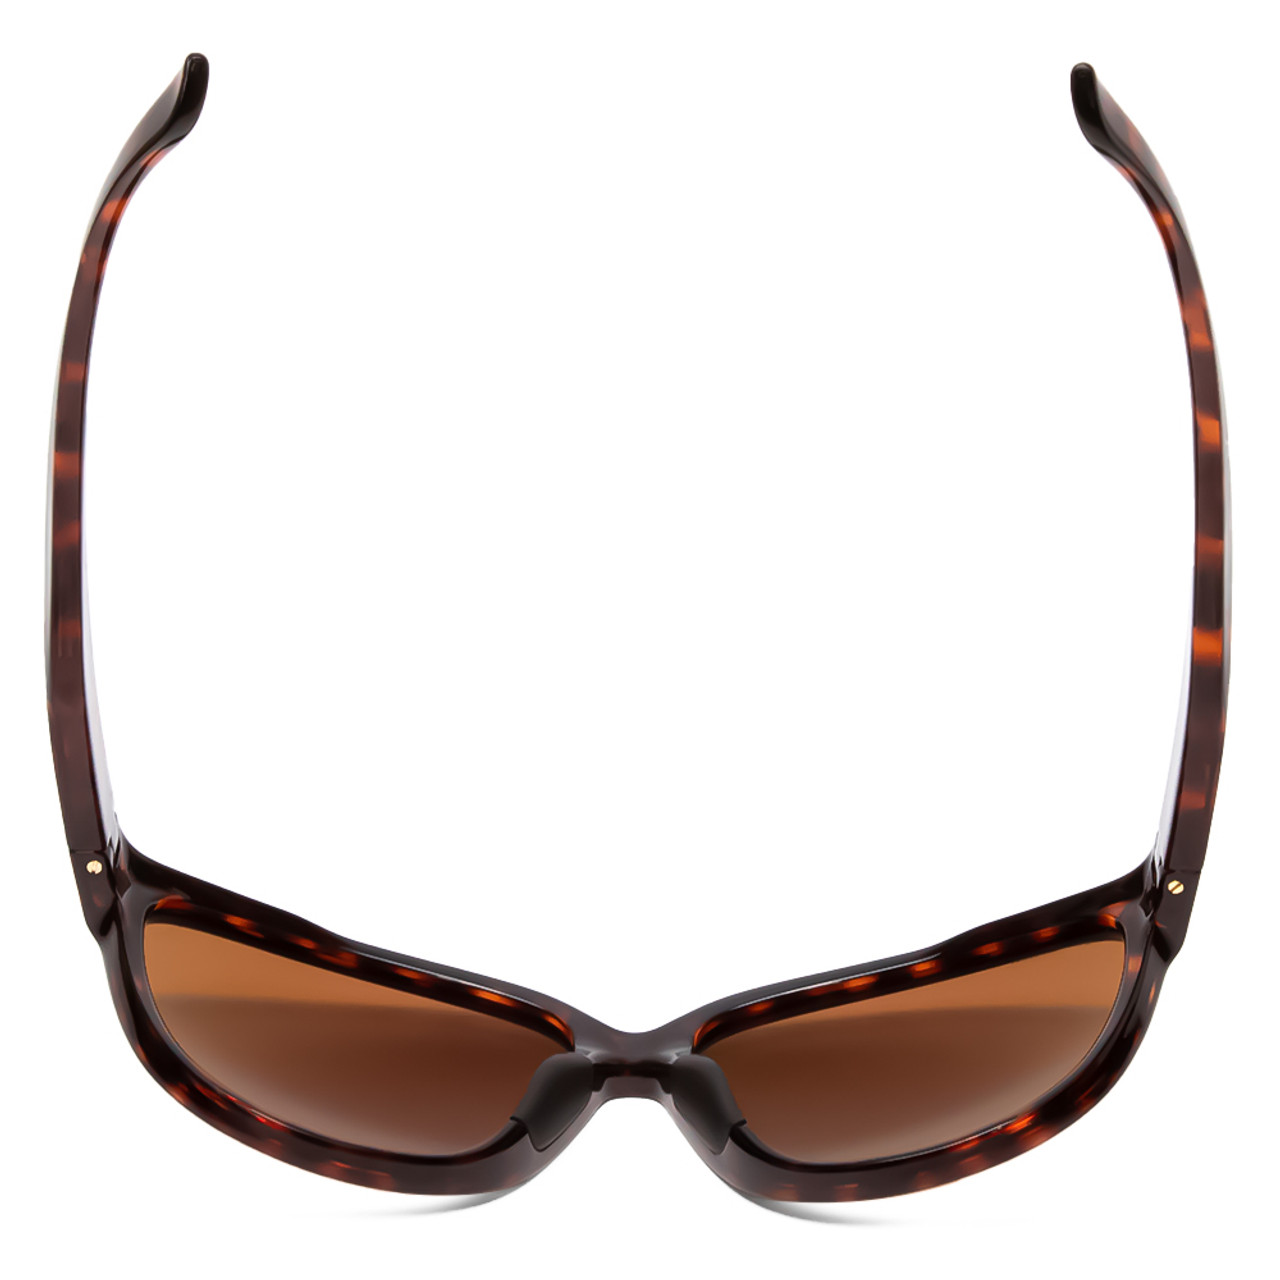 Top View of Smith Monterey Lady Cateye Sunglasses Tortoise Gold/CP Glass Polarize Brown 58mm